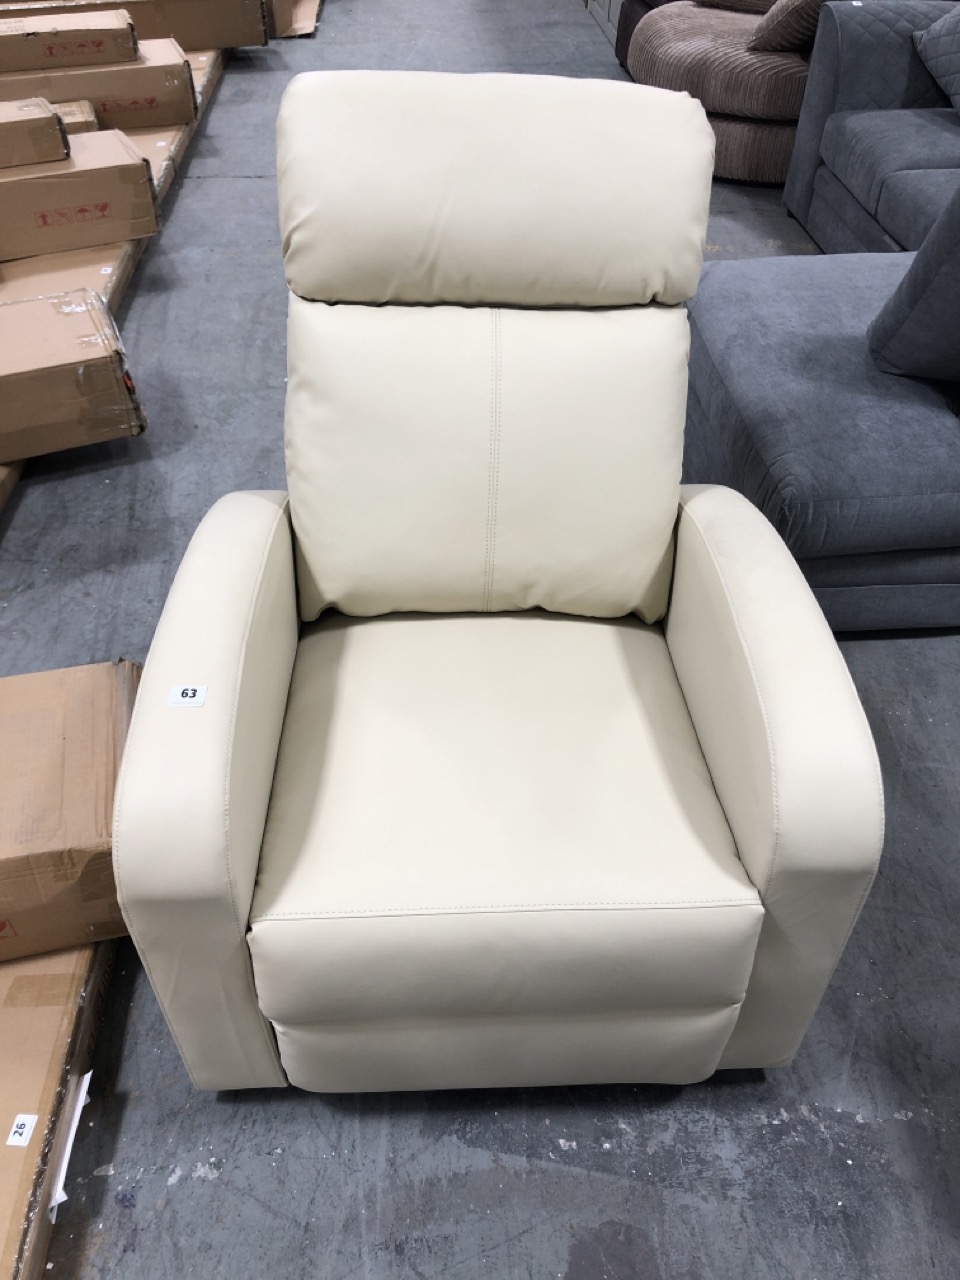 RAMSEY FAUX LEATHER RECLINER CHAIR IN CREAM RRP- £259 (COLLECTION OR OPTIONAL DELIVERY)